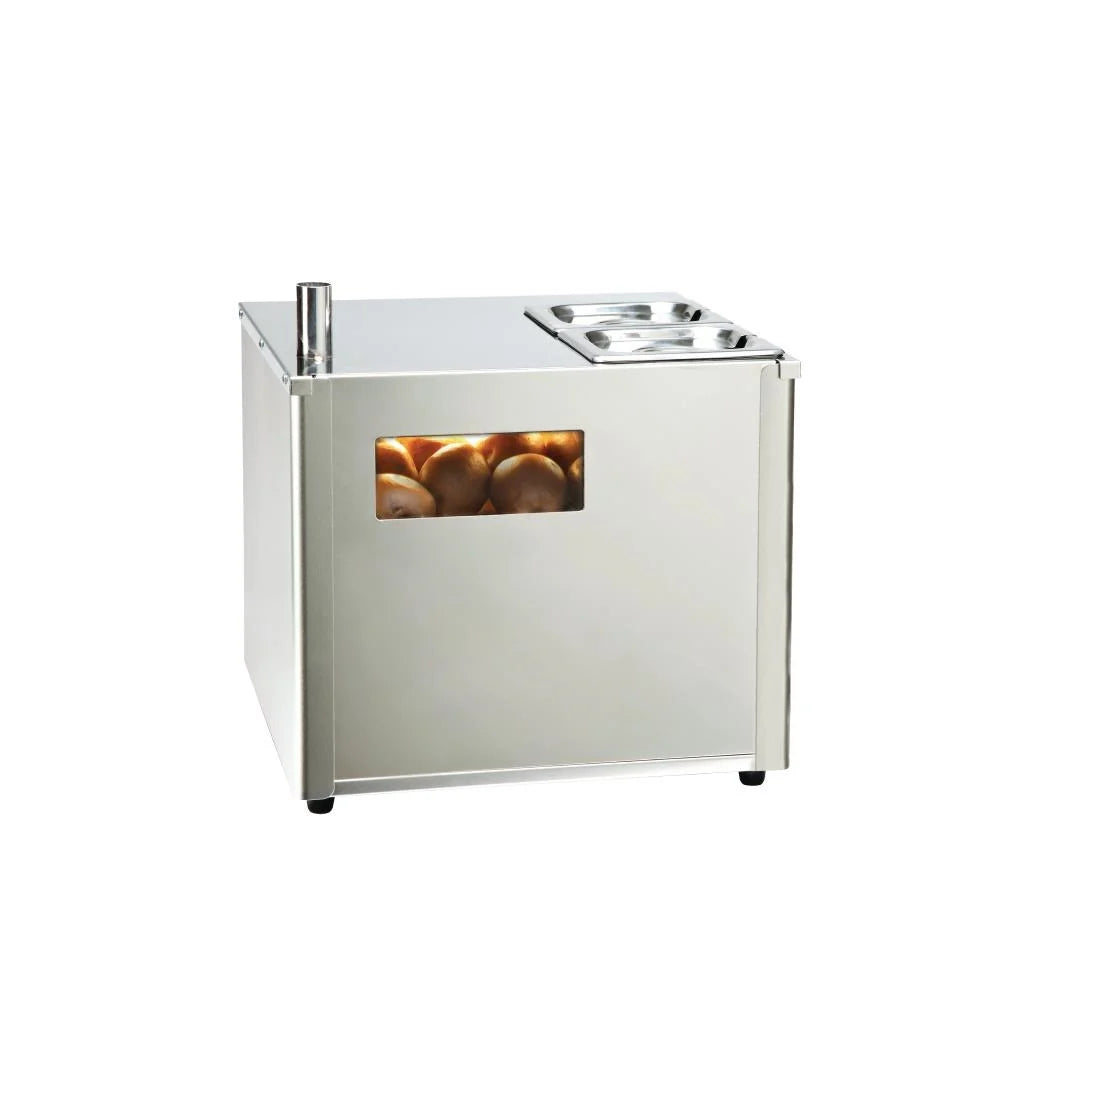 King Edward Compact Lite Oven Stainless Steel COMPLITE/SS.Product Ref:00675.Model:COMPLITE/SS. 🚚 3-5 Days Delivery